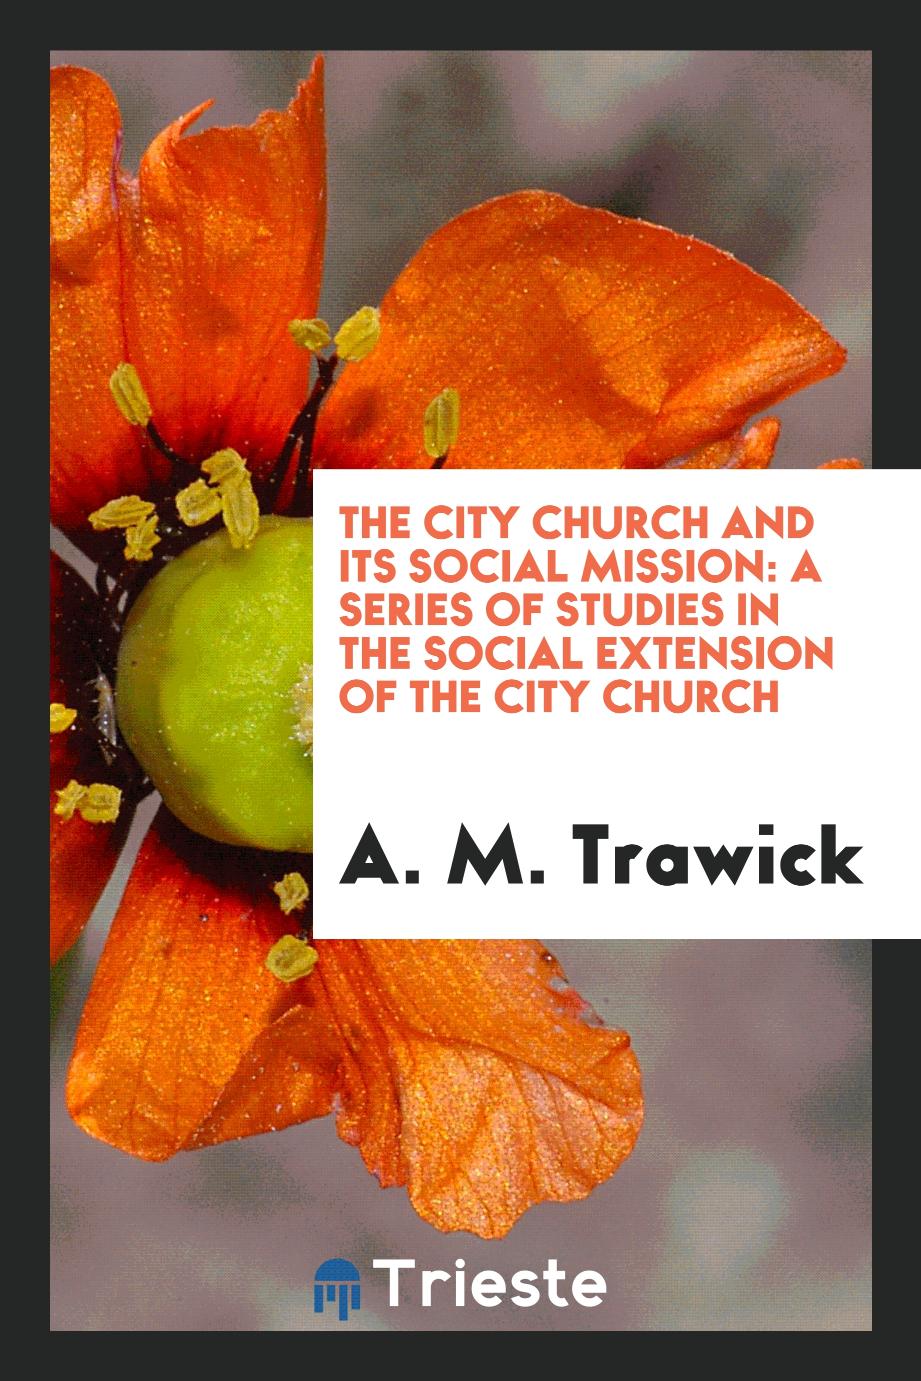 The City Church and Its Social Mission: A Series of Studies in the Social Extension of the City Church